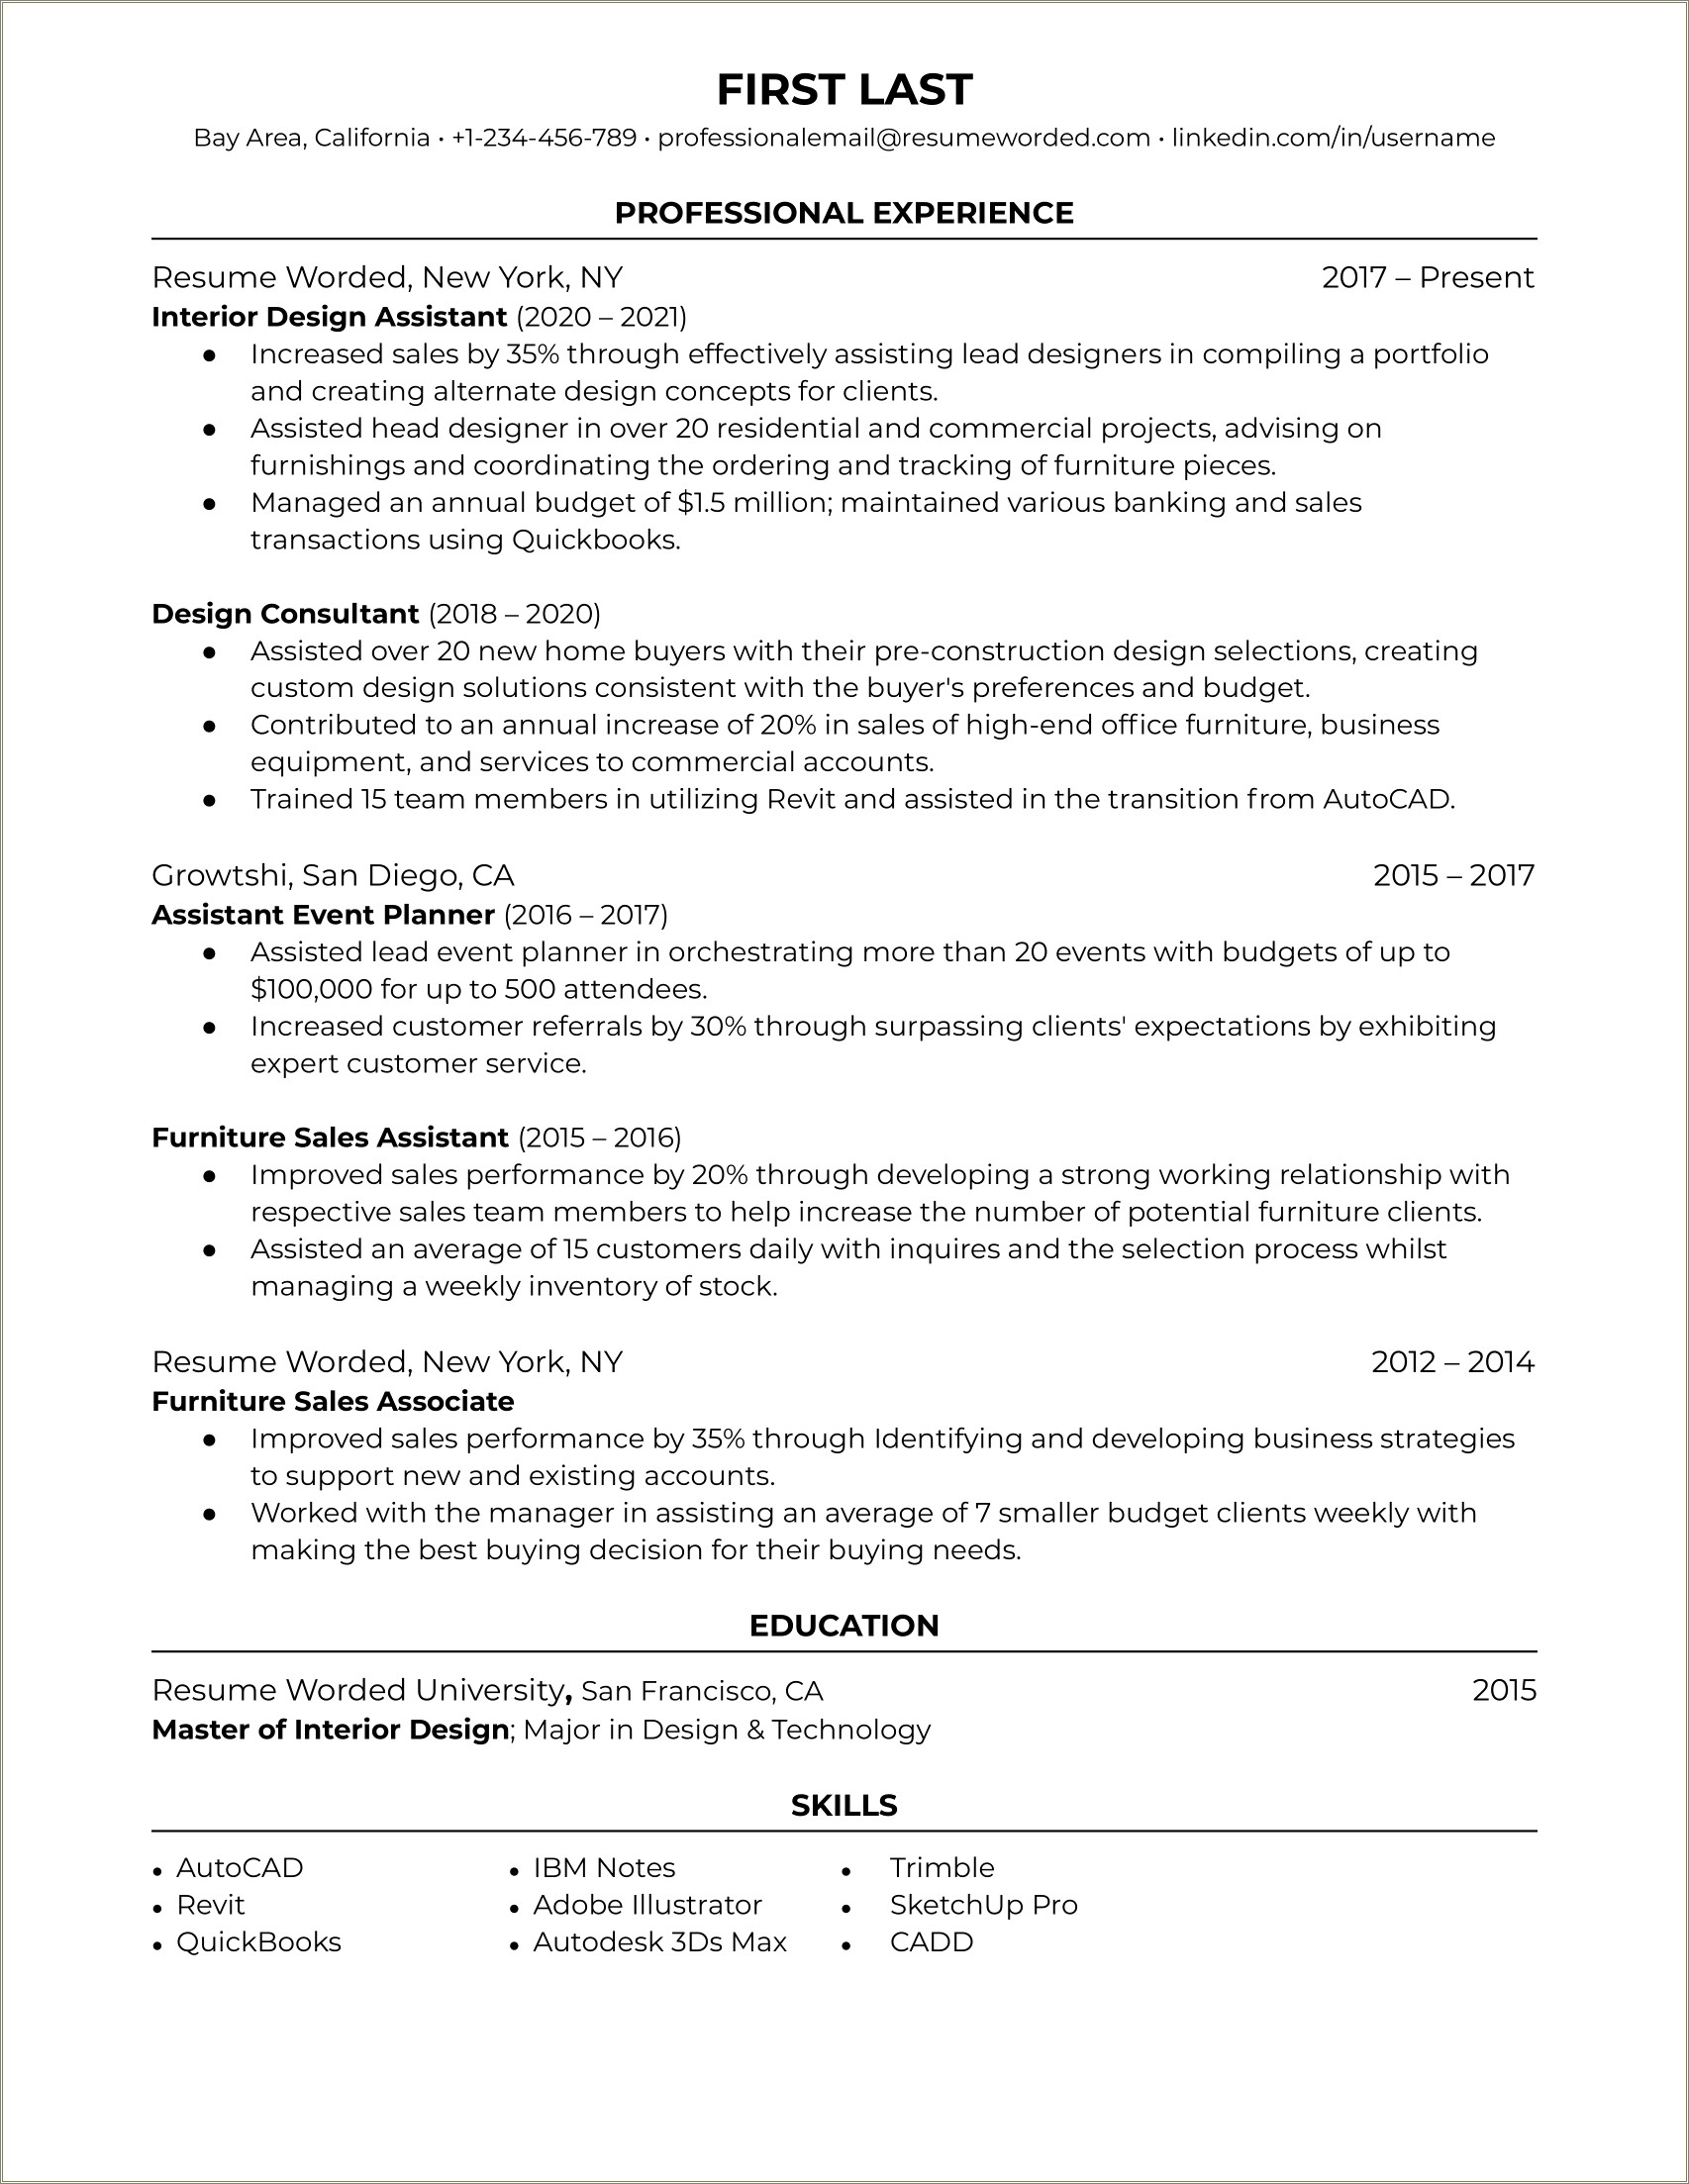 Word For Moving Furniture In Resume